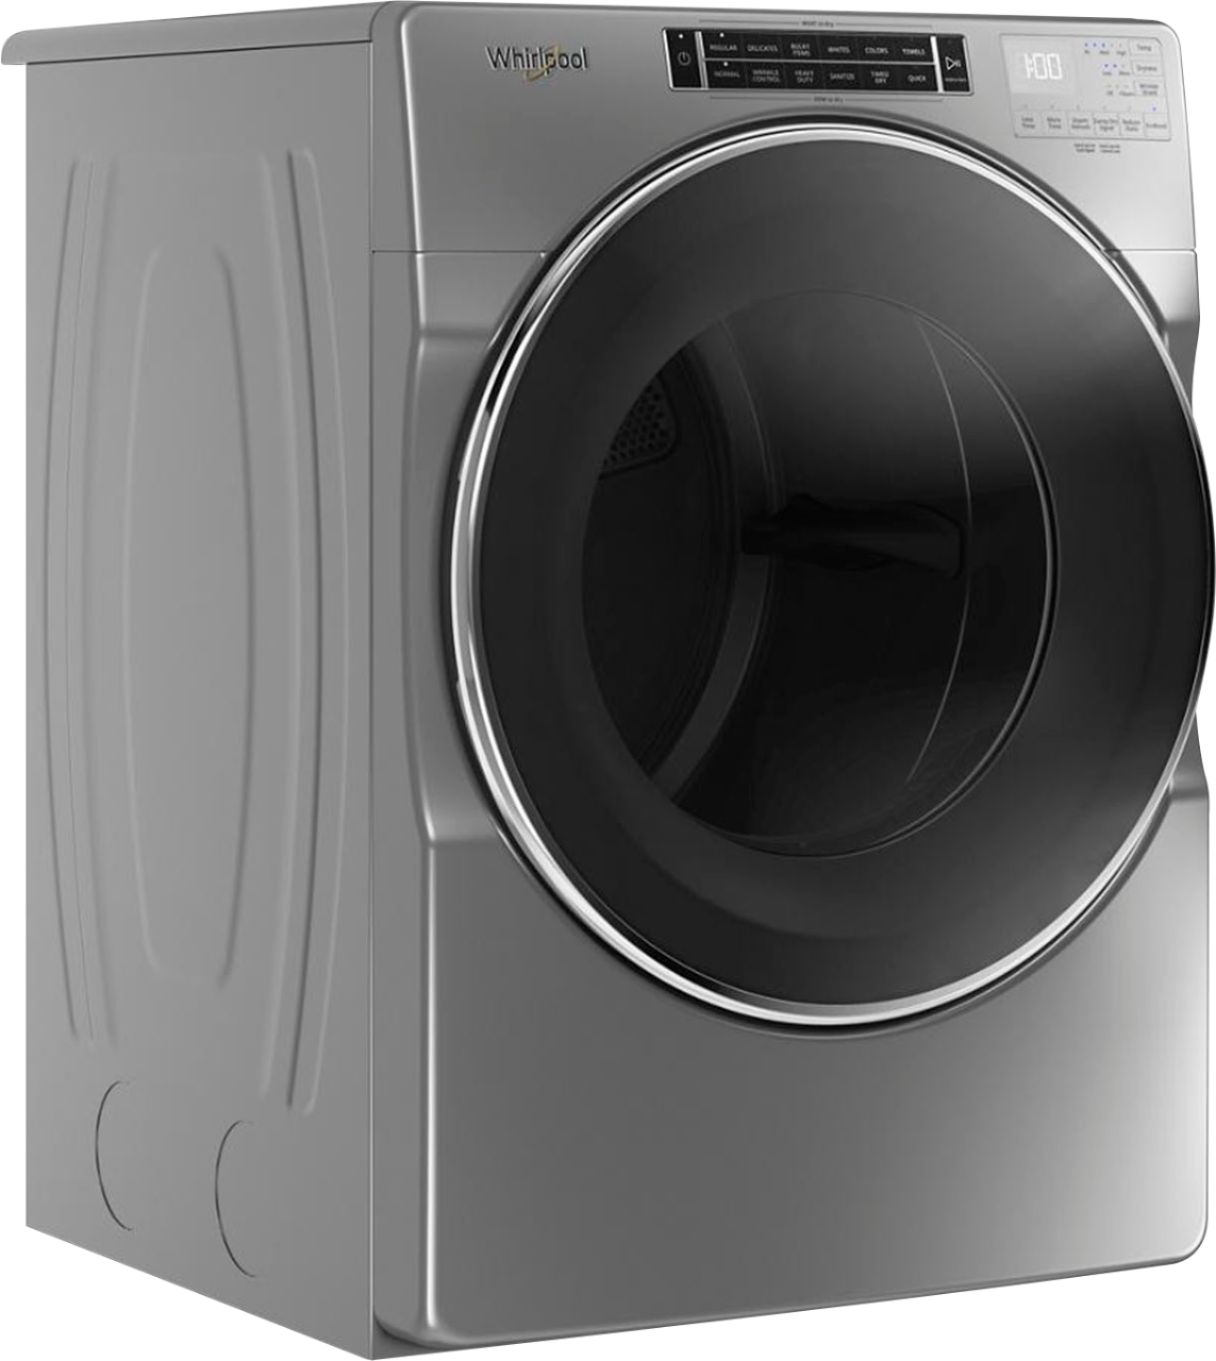 Angle View: Whirlpool - 7.4 Cu. Ft. Stackable Electric Dryer with Steam and Intuitive Controls - Chrome shadow